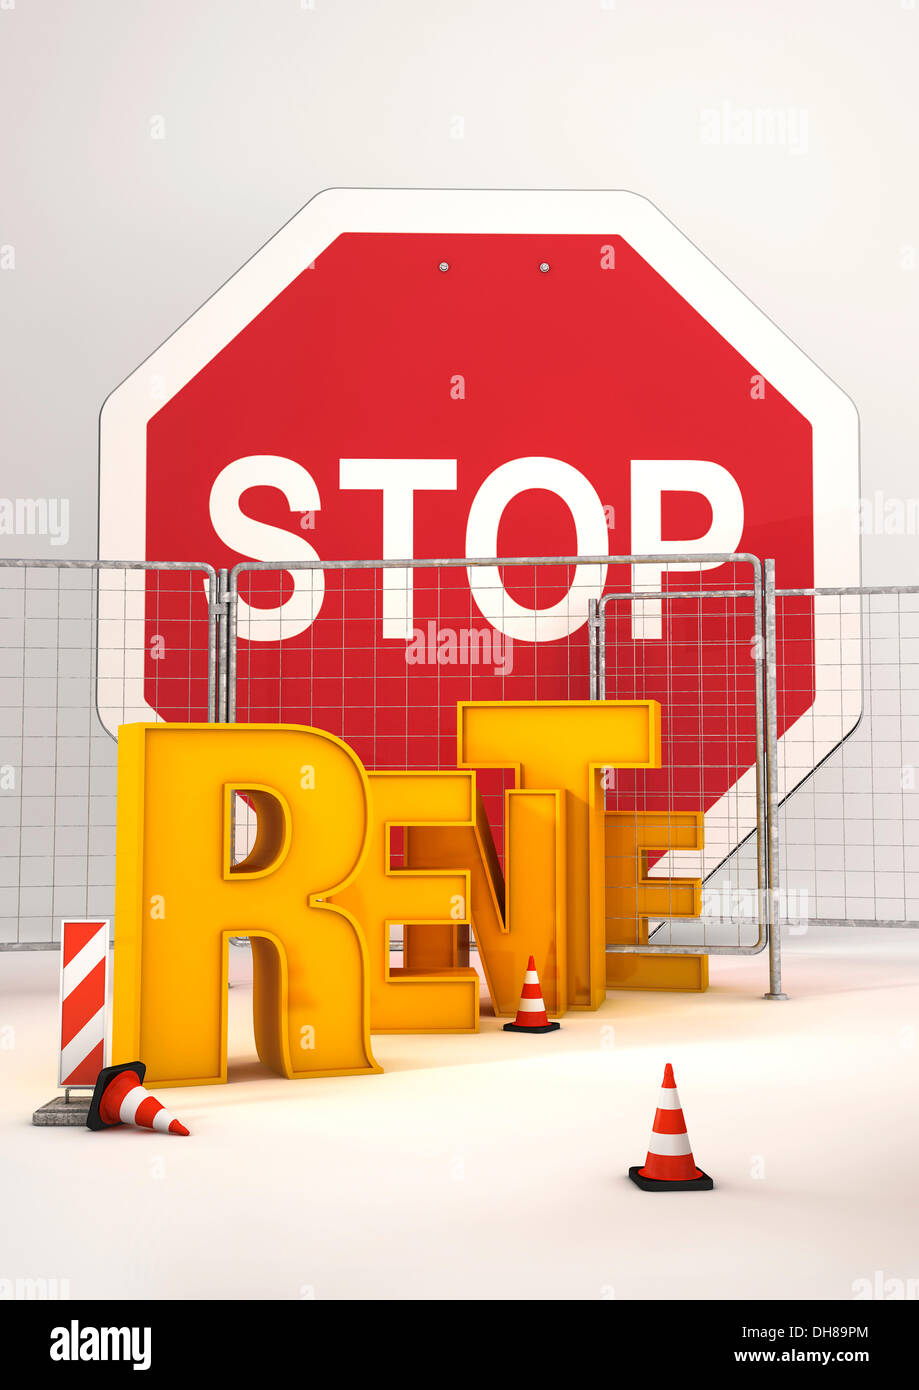 Stop sign, building site, 'Rente', German for 'pensions', 3D illustration Stock Photo